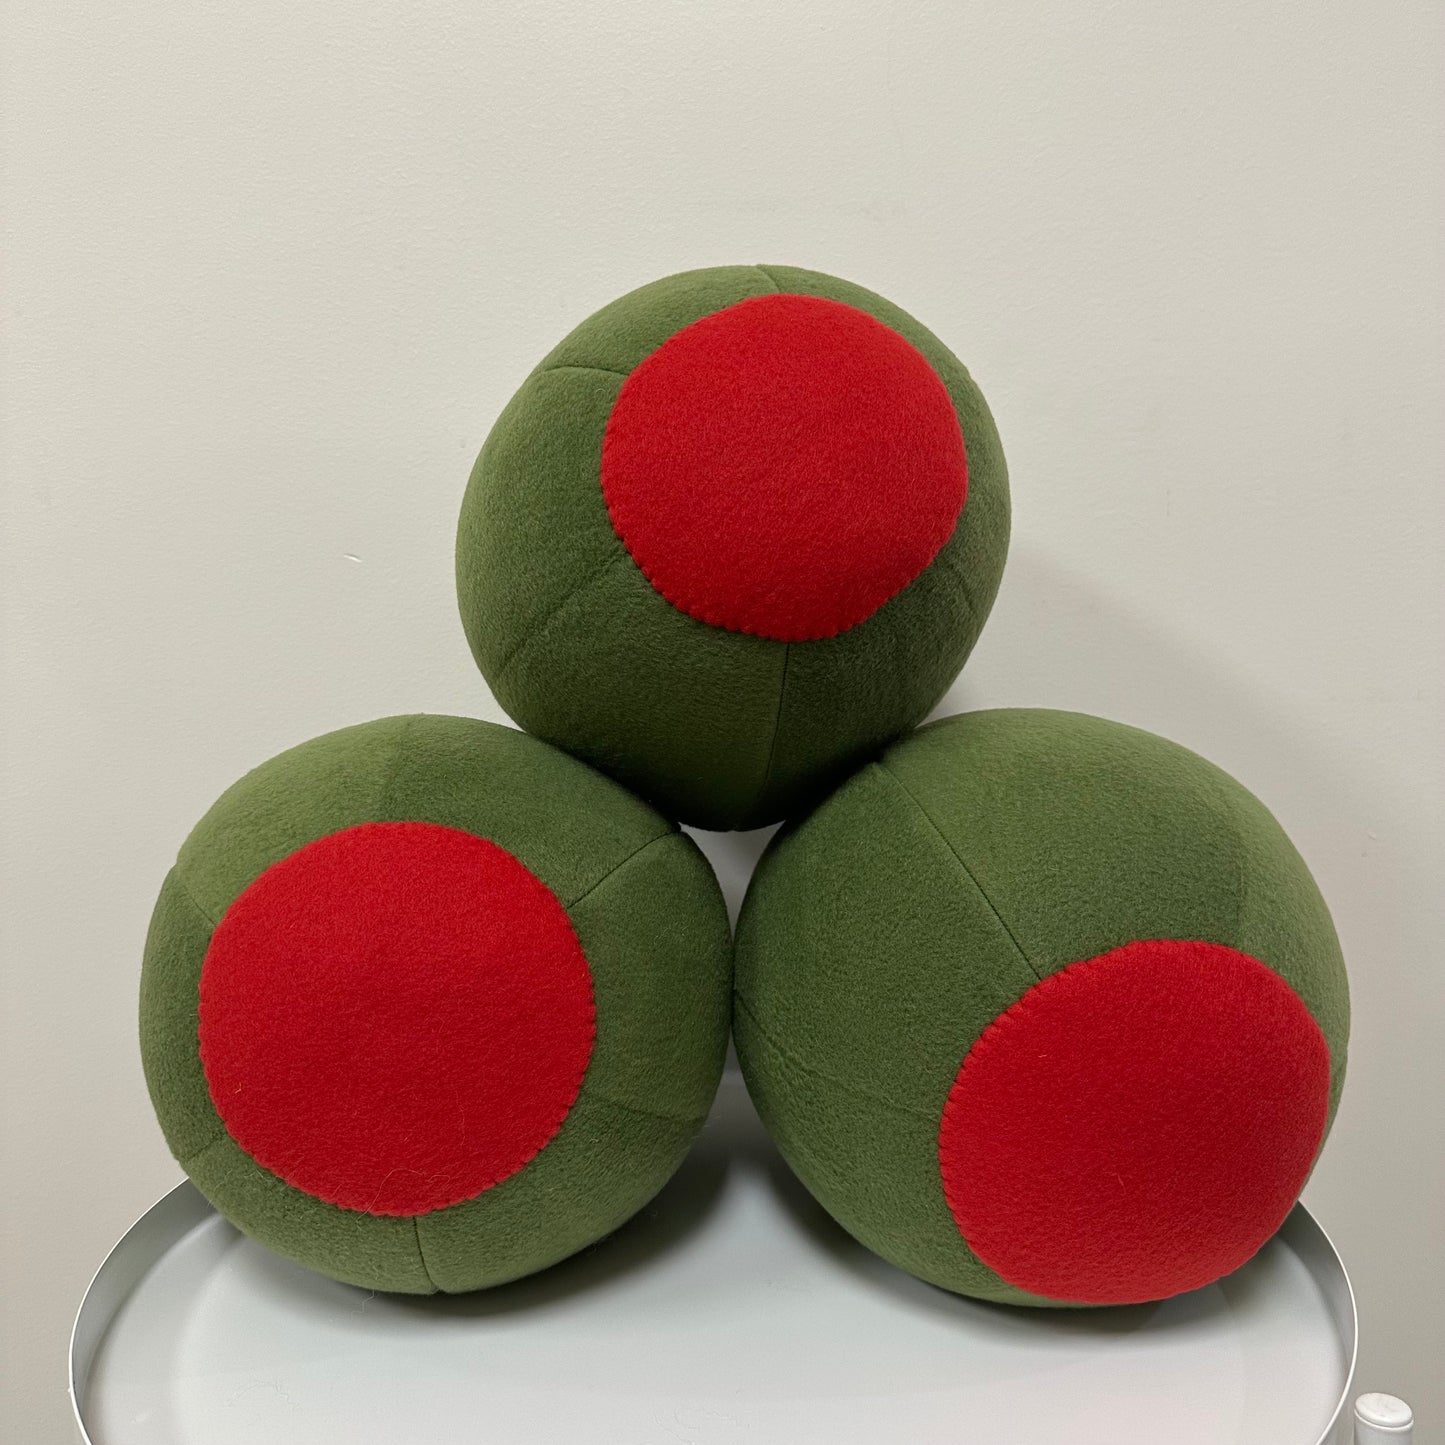 Three green olive pillows with pimento side showing.